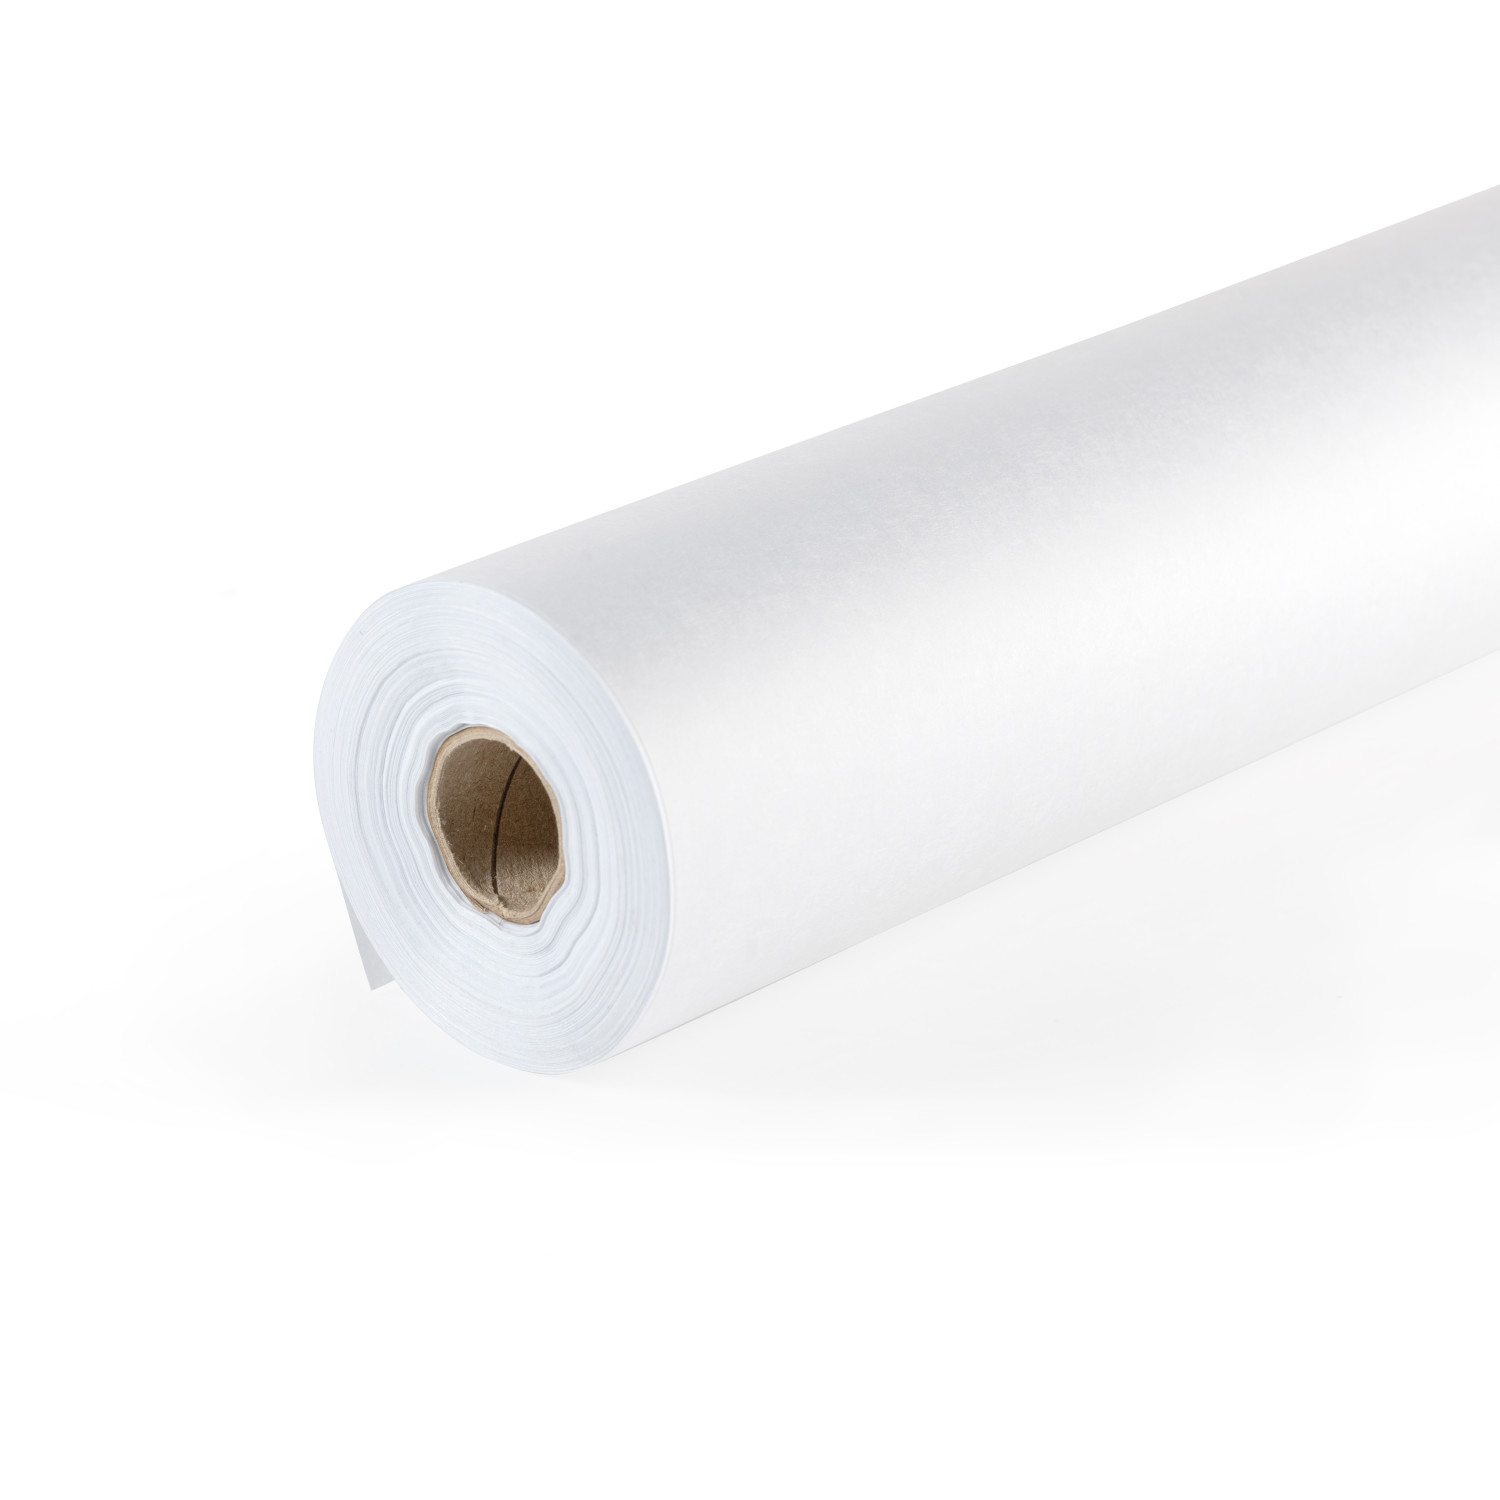 36 x 1100' Freezer Paper Roll for Meat and Fish, White buy in stock in  U.S. in IDL Packaging